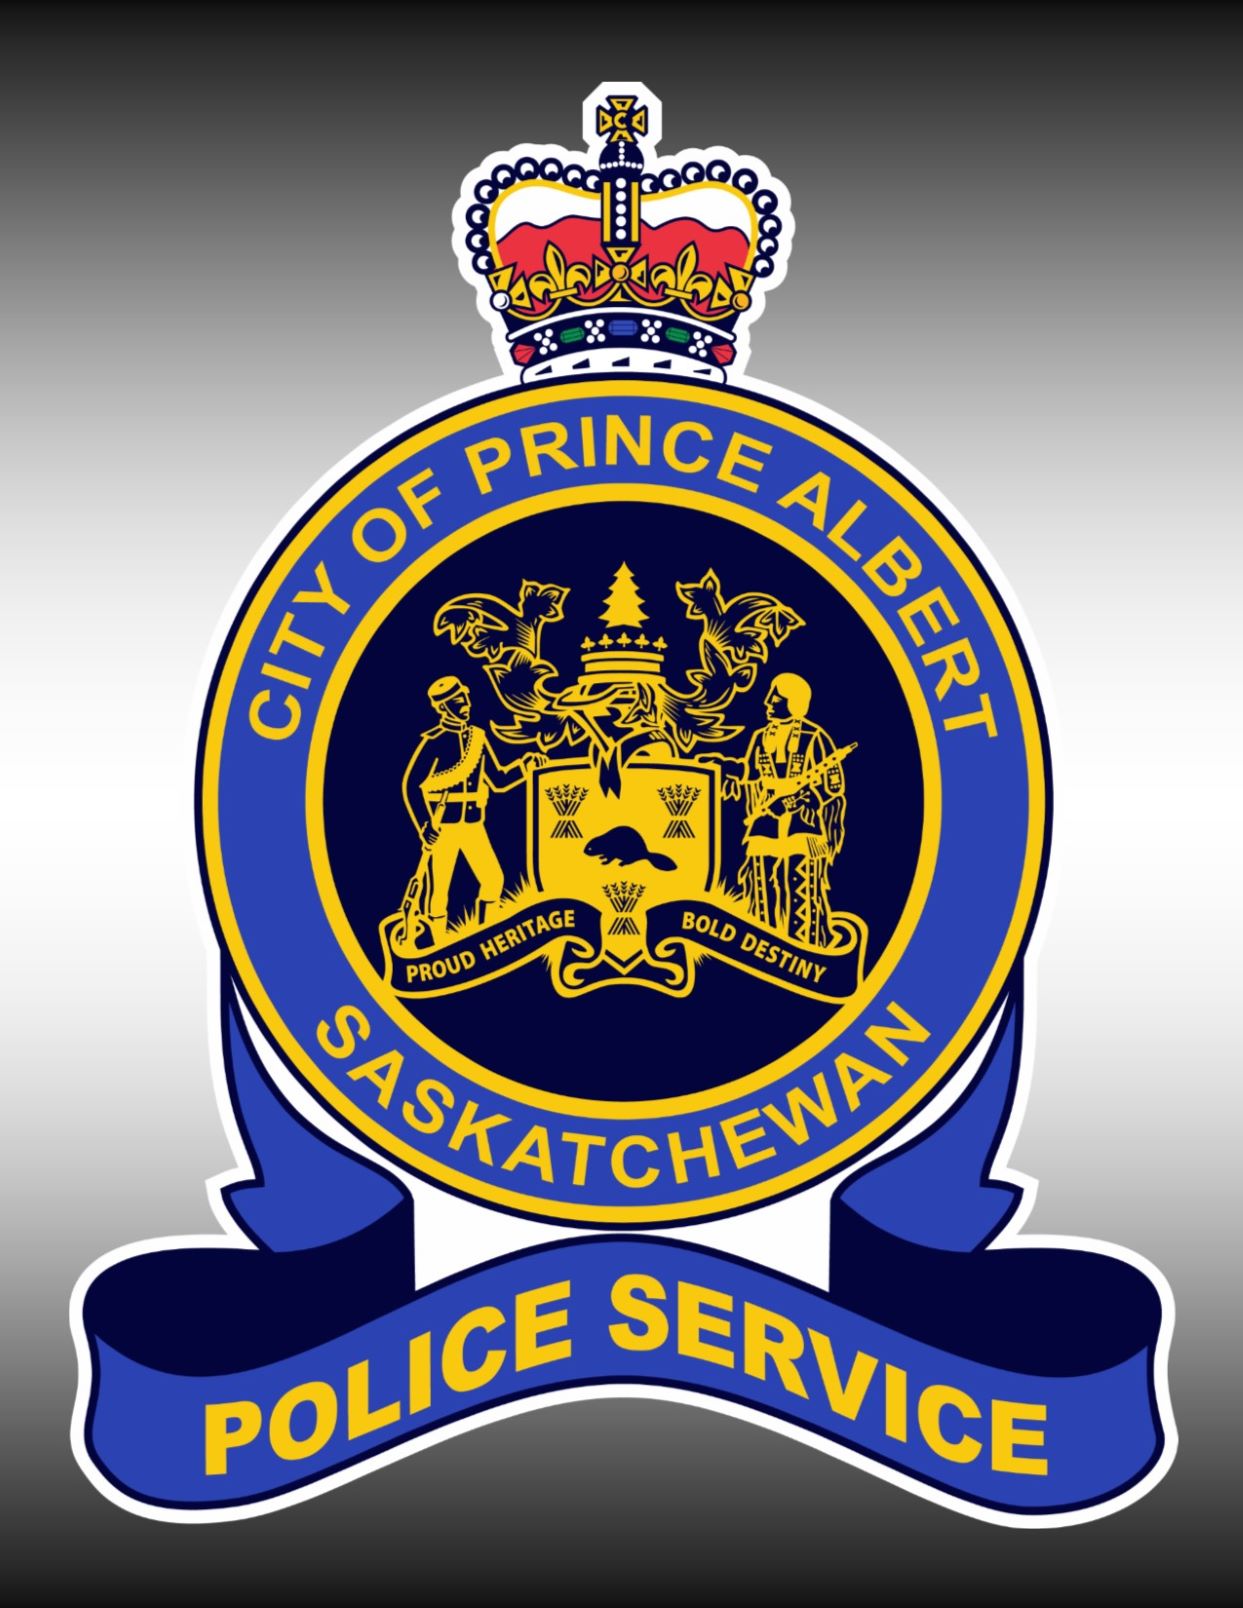 Media Release - Prince Albert Police promote traffic safety with Operation Impact